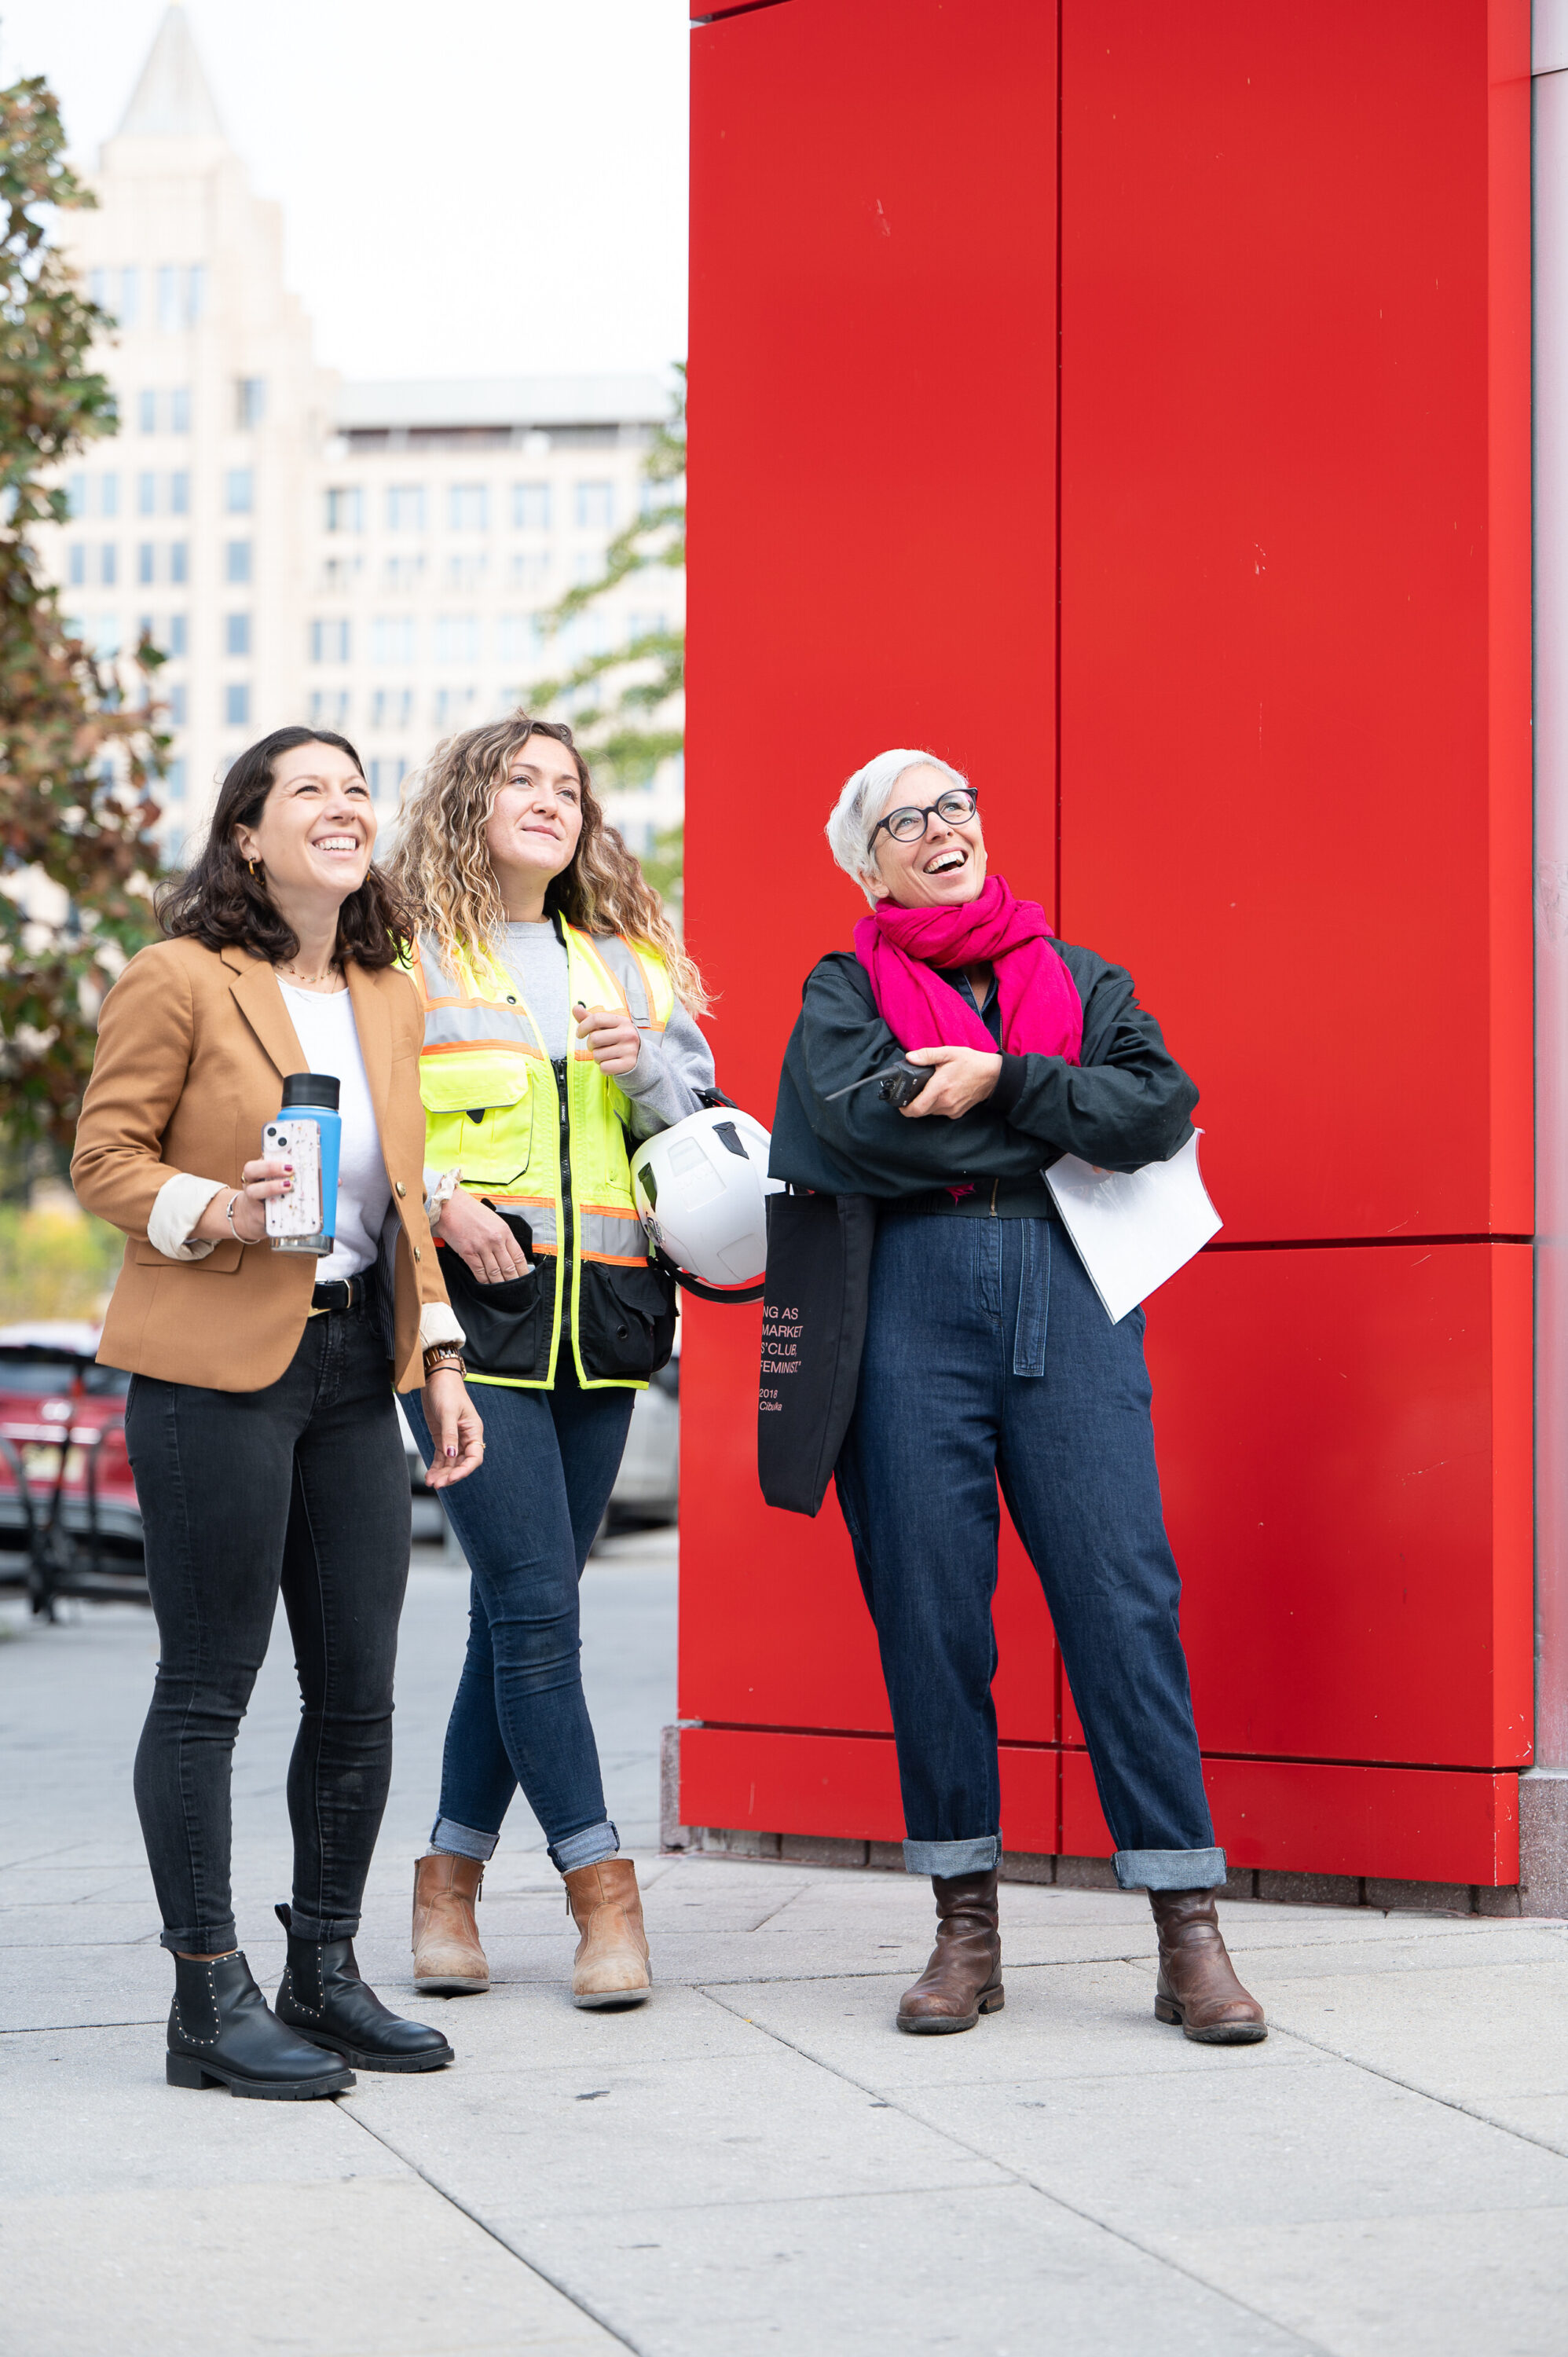 Three women with light skin tones are standing next to each other, looking up. The woman in the middle is wearing a yellow security jacket and hard hat. The woman on the right has short, gray hair and is wearing a denim overall and a pink scarf.